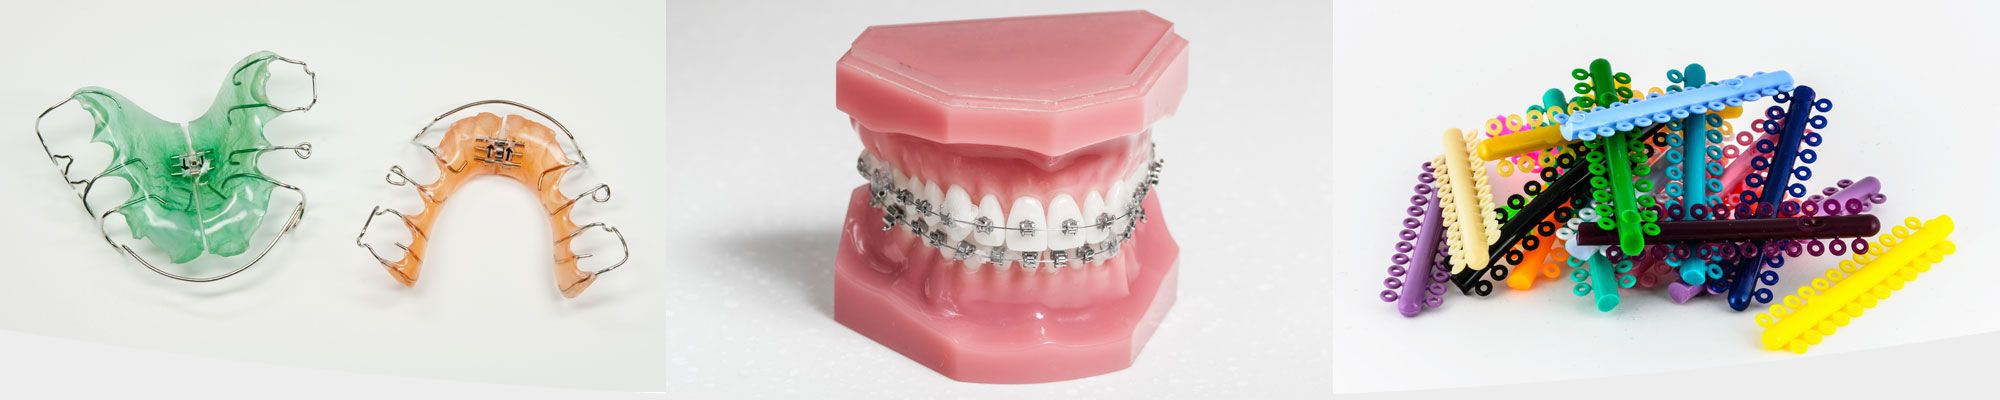 Examples of visible braces